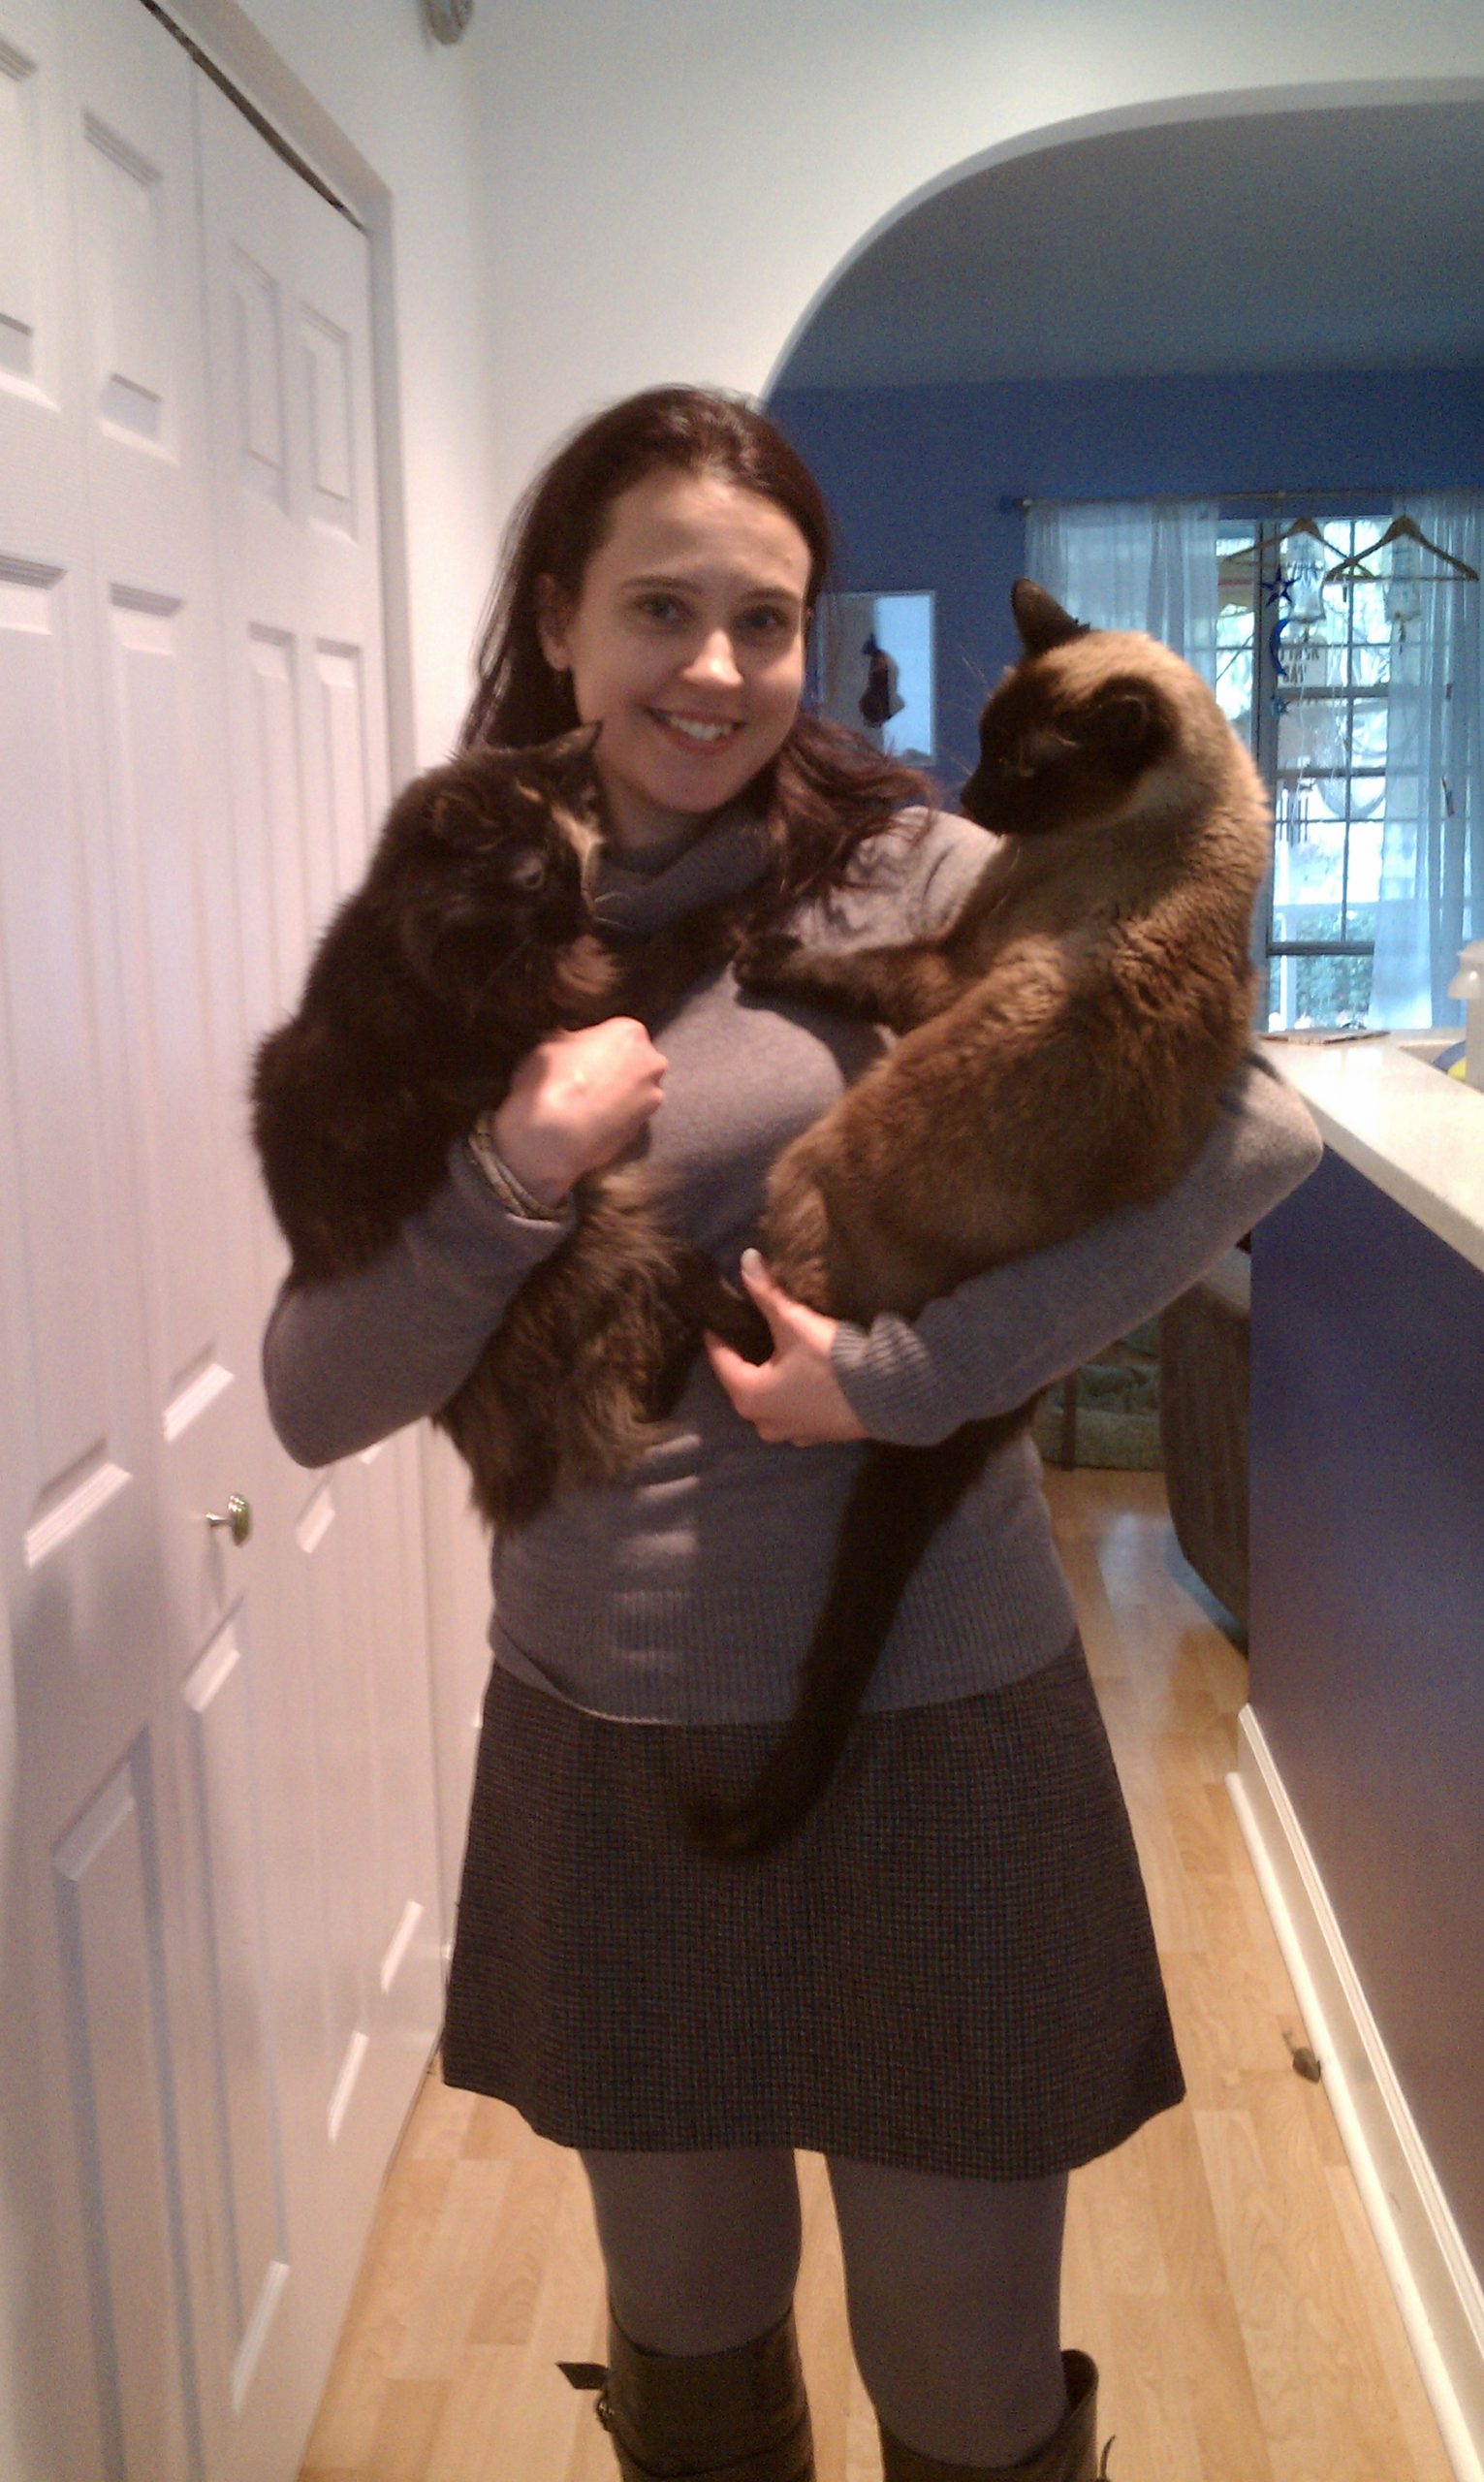 Me, holding Wiccas and Simon!